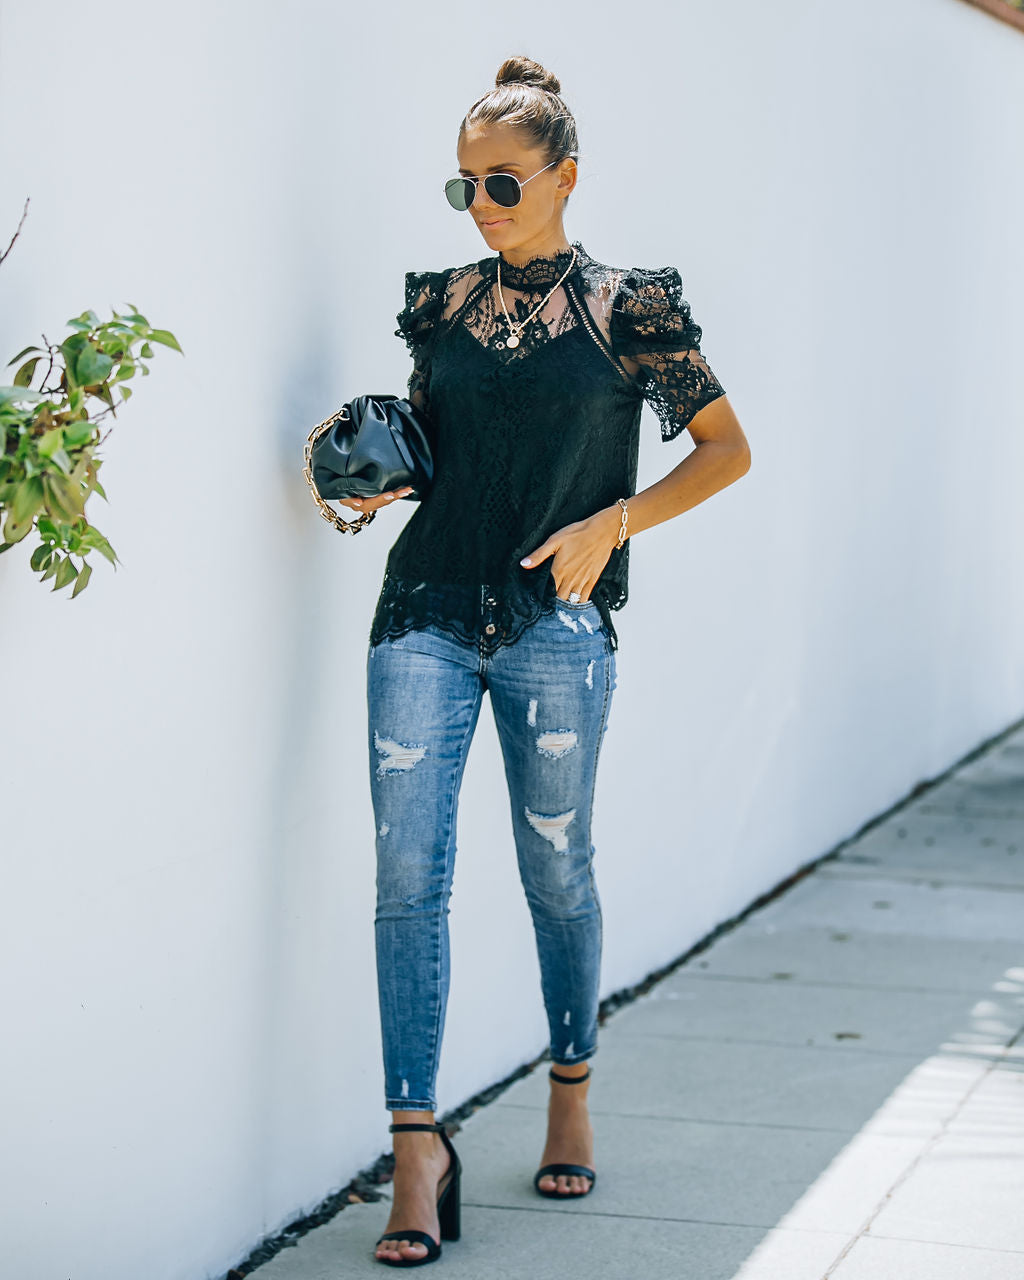 Songwriter Scalloped Lace Blouse - Black